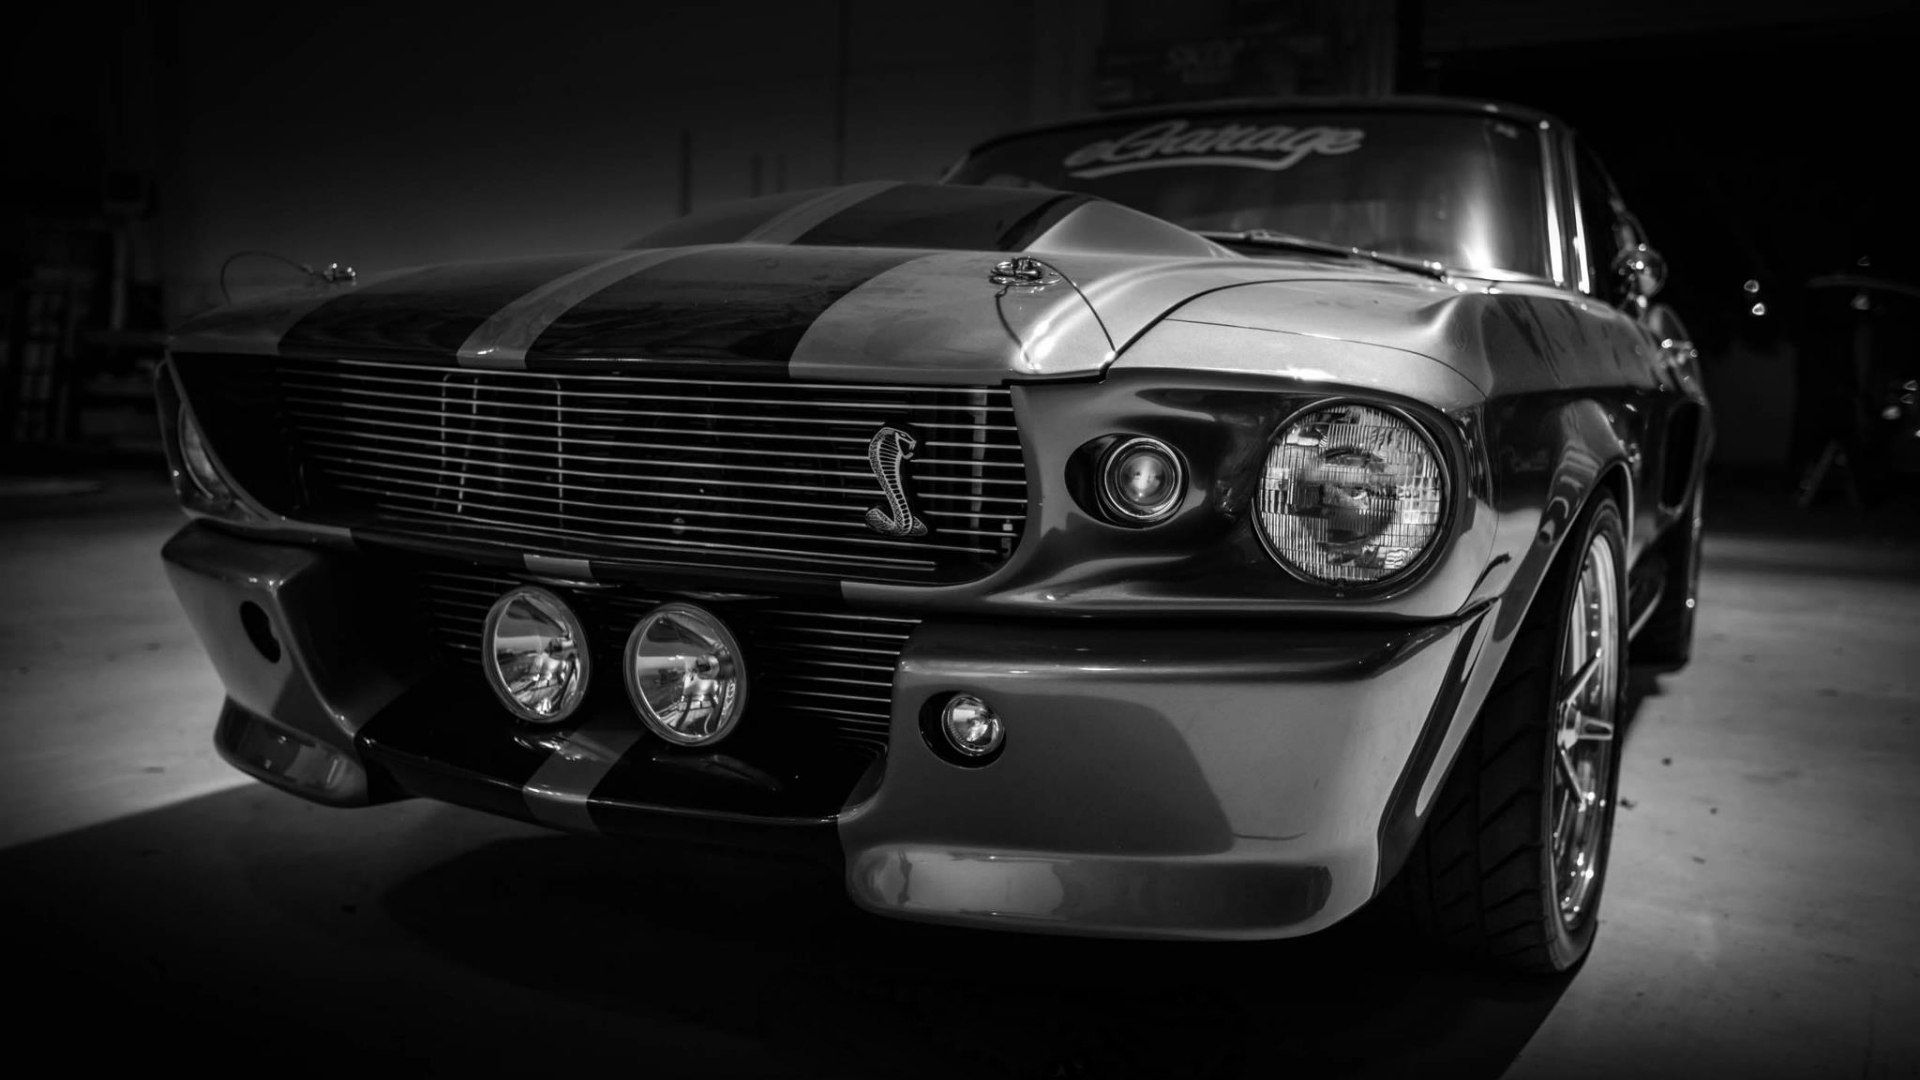 Shelby GT500 HD wallpaper. Ford mustang shelby